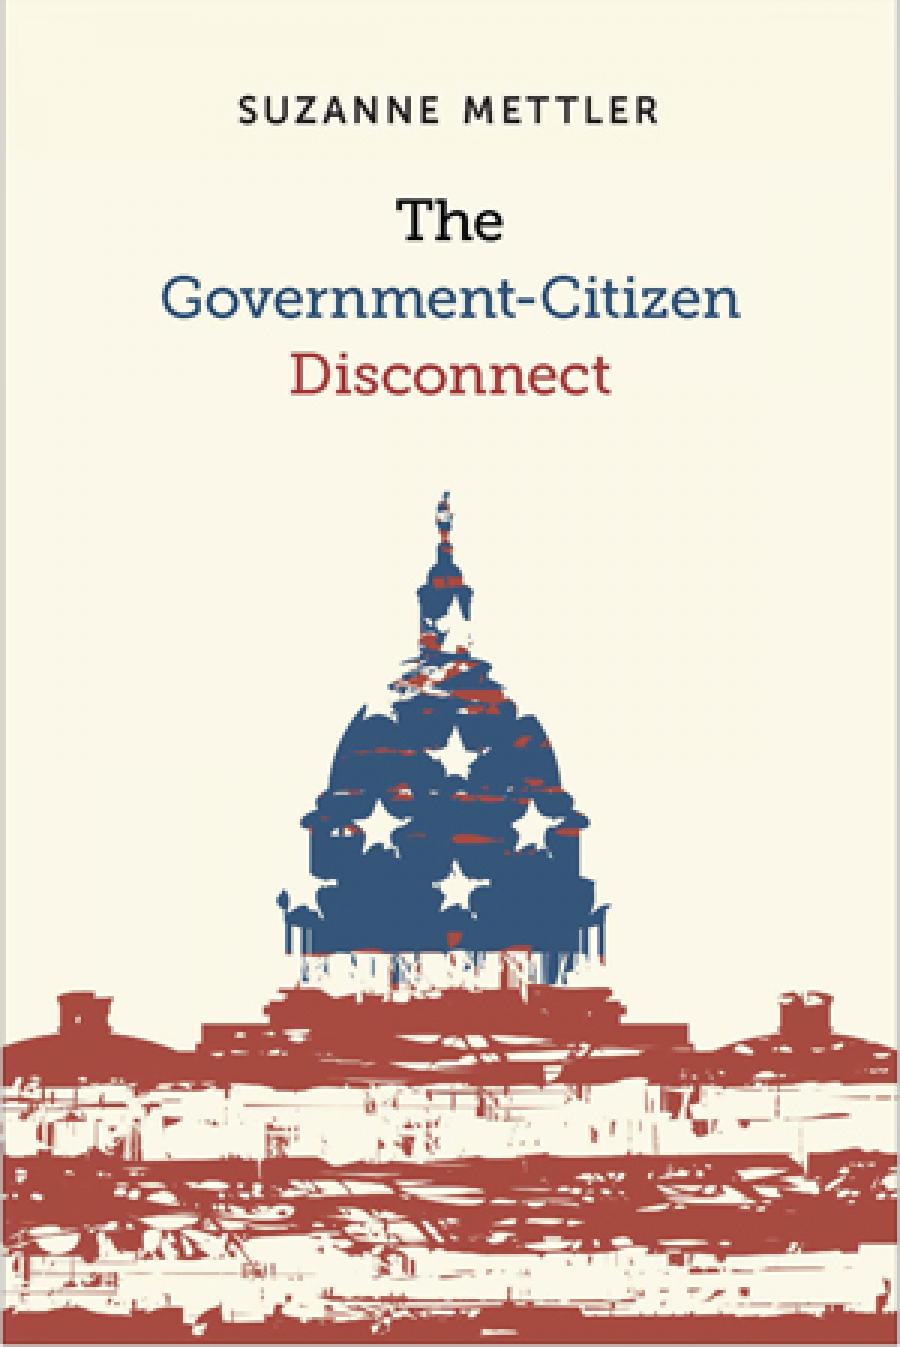 Cover of Suzanne Mettler's book The Government-Citizen Disconnect